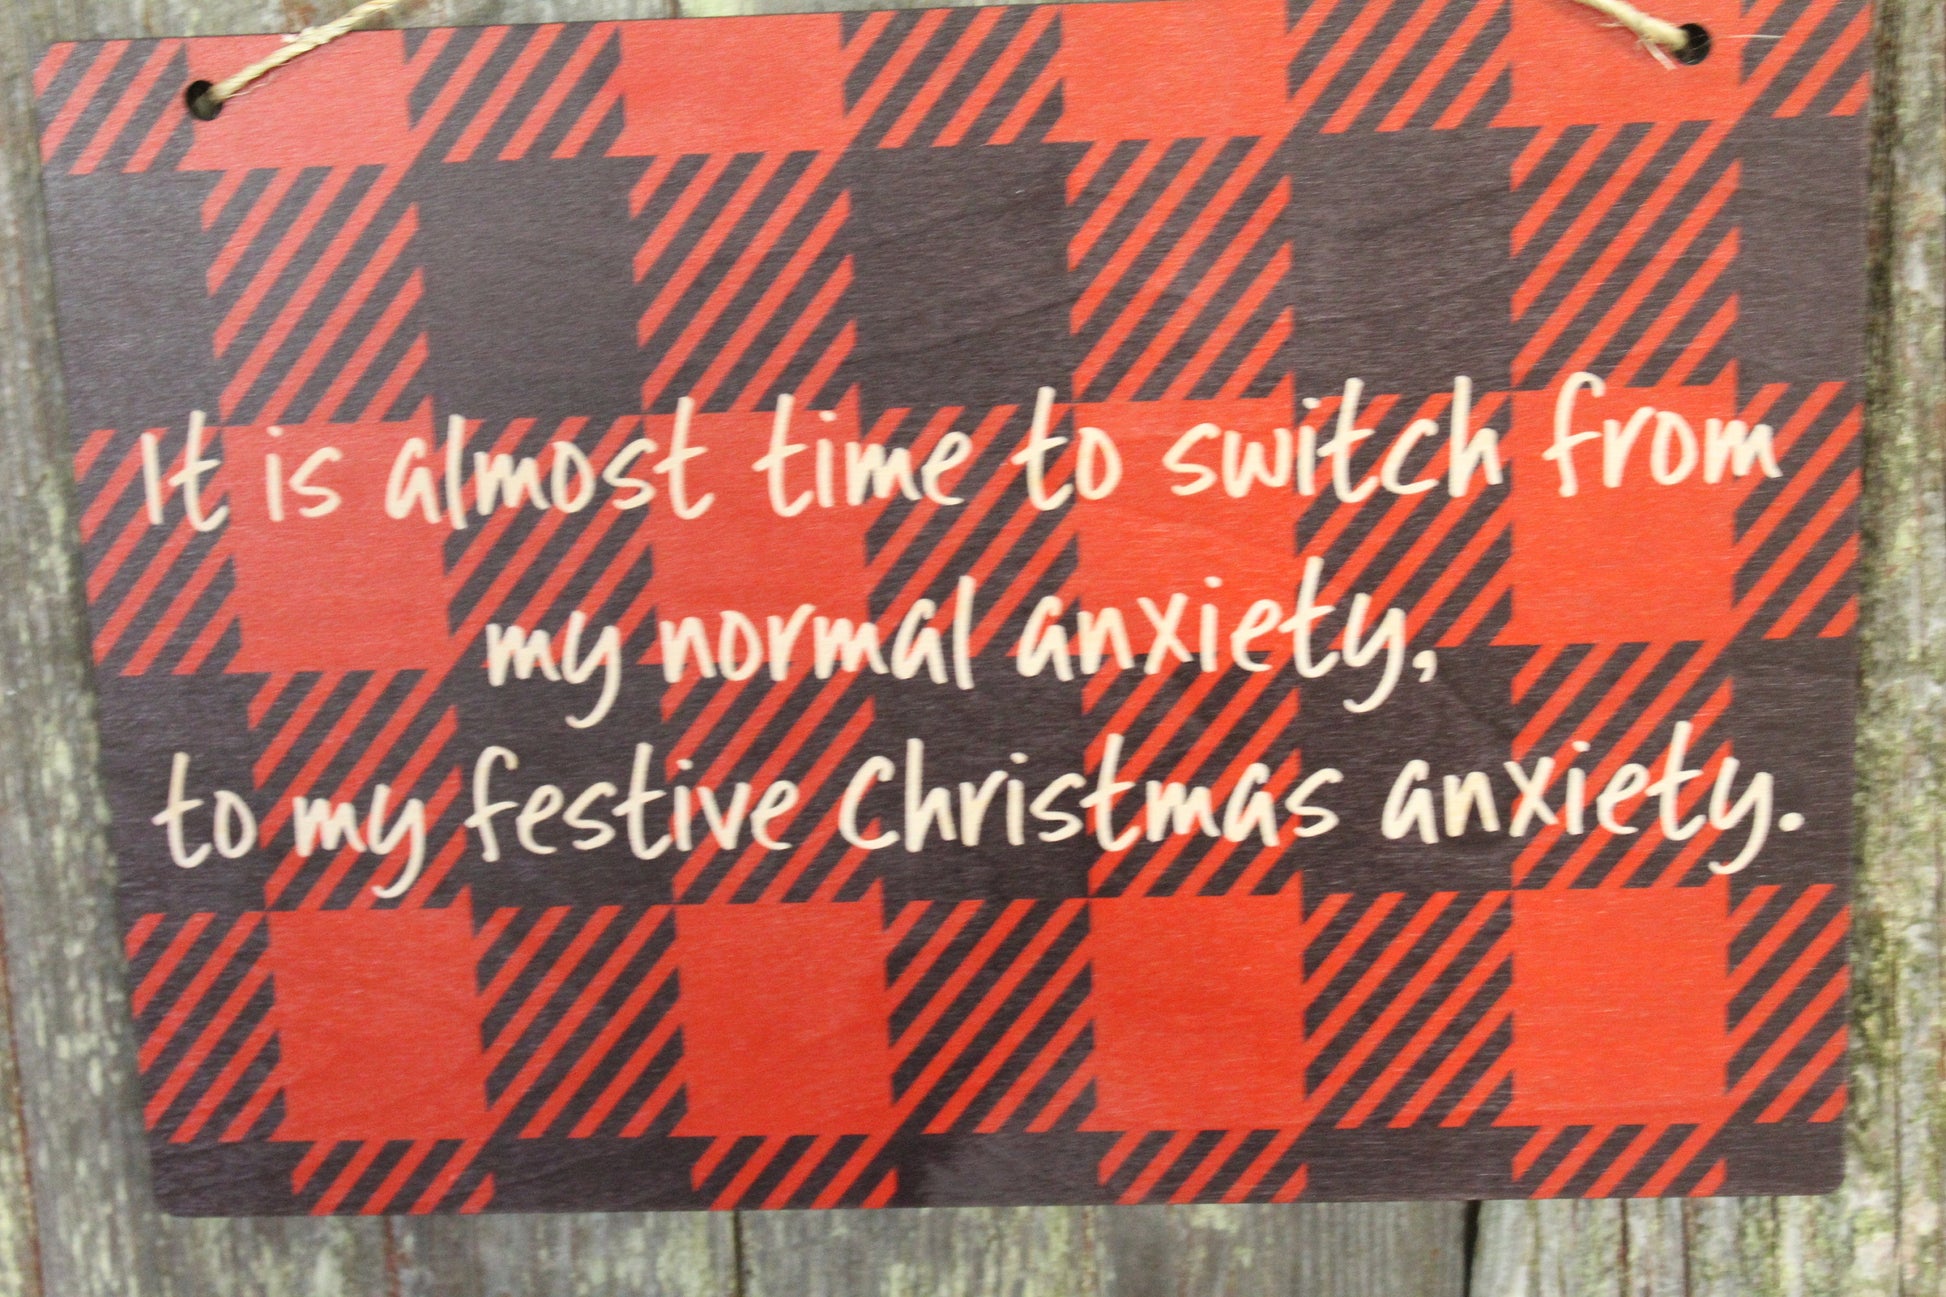 Christmas Anxiety Sign Funny Festive Hostess Gift Buffalo Plaid Rustic Wooden Wall Decor Art Plaque Wood Print